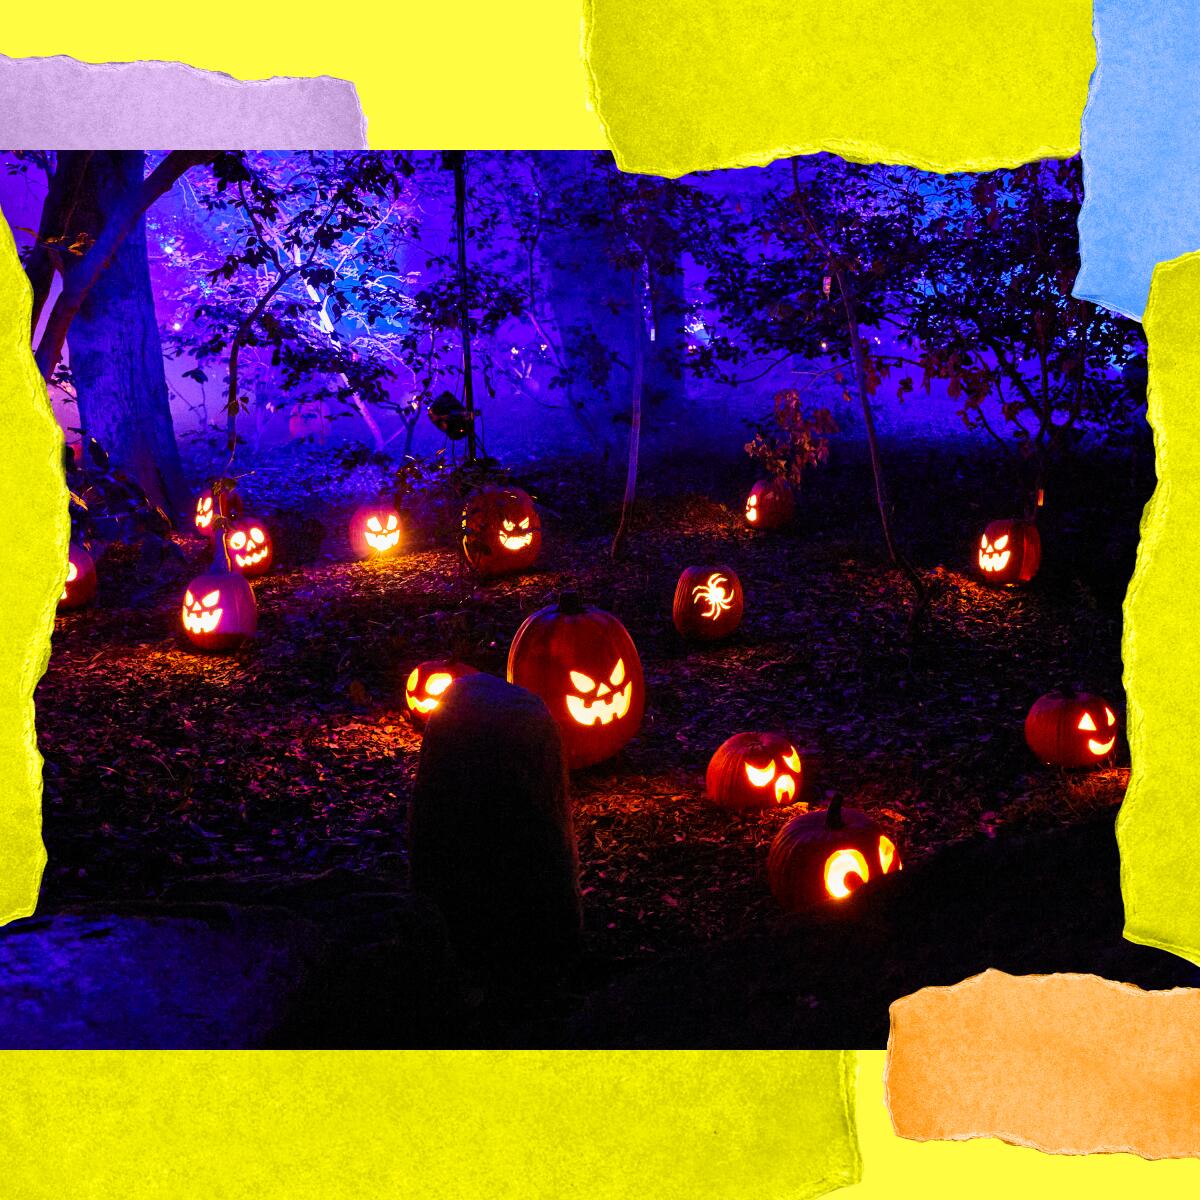 Carved pumpkins glow in the dark in an area strewn with leaves and lit by purplish lights.